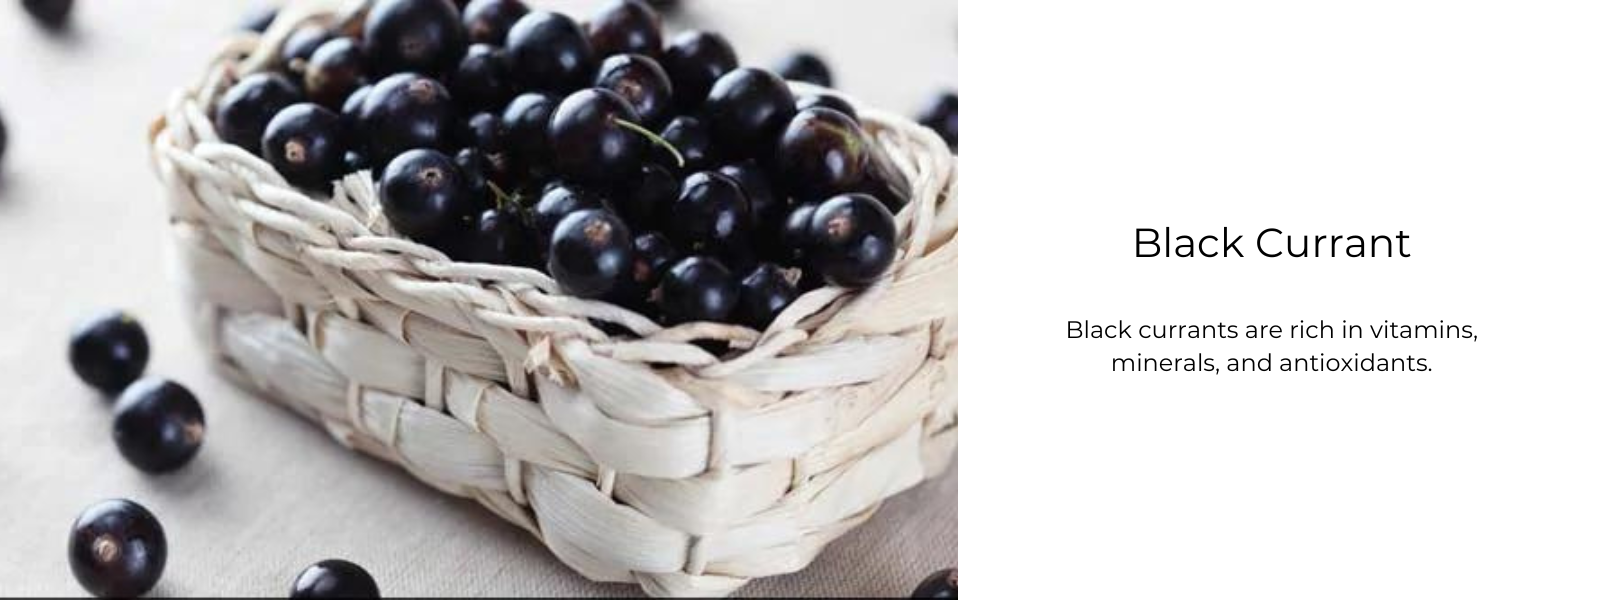 Black Currant - Health Benefits, Uses and Important Facts